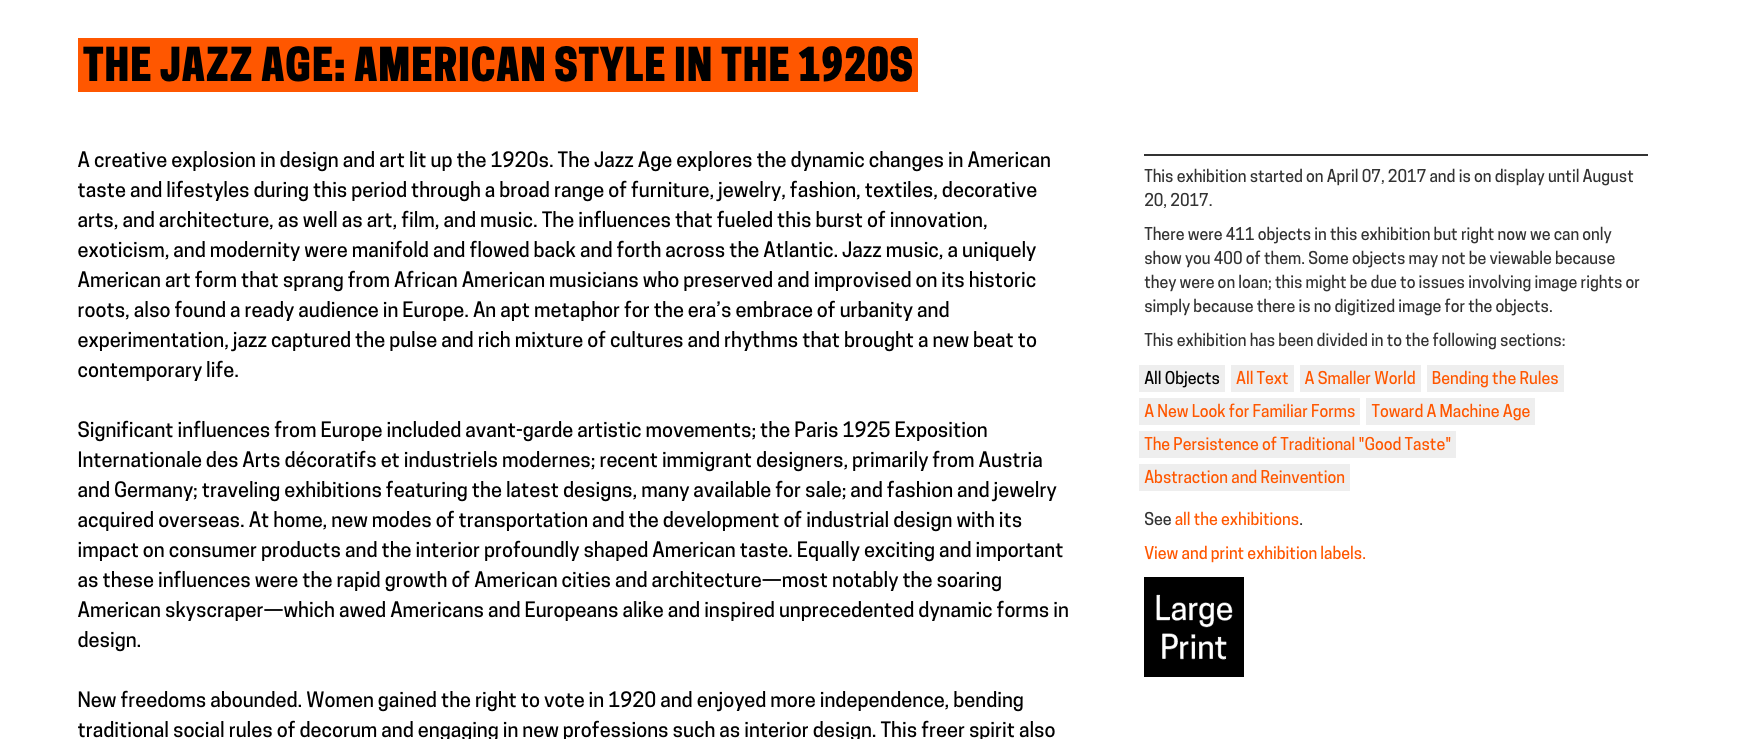 Web screenshot of online large print labels. Top reads exhibition title The Jazz Age: American Style in the 1920s. Below, introductory text is printed, the right includes dates and keywords.